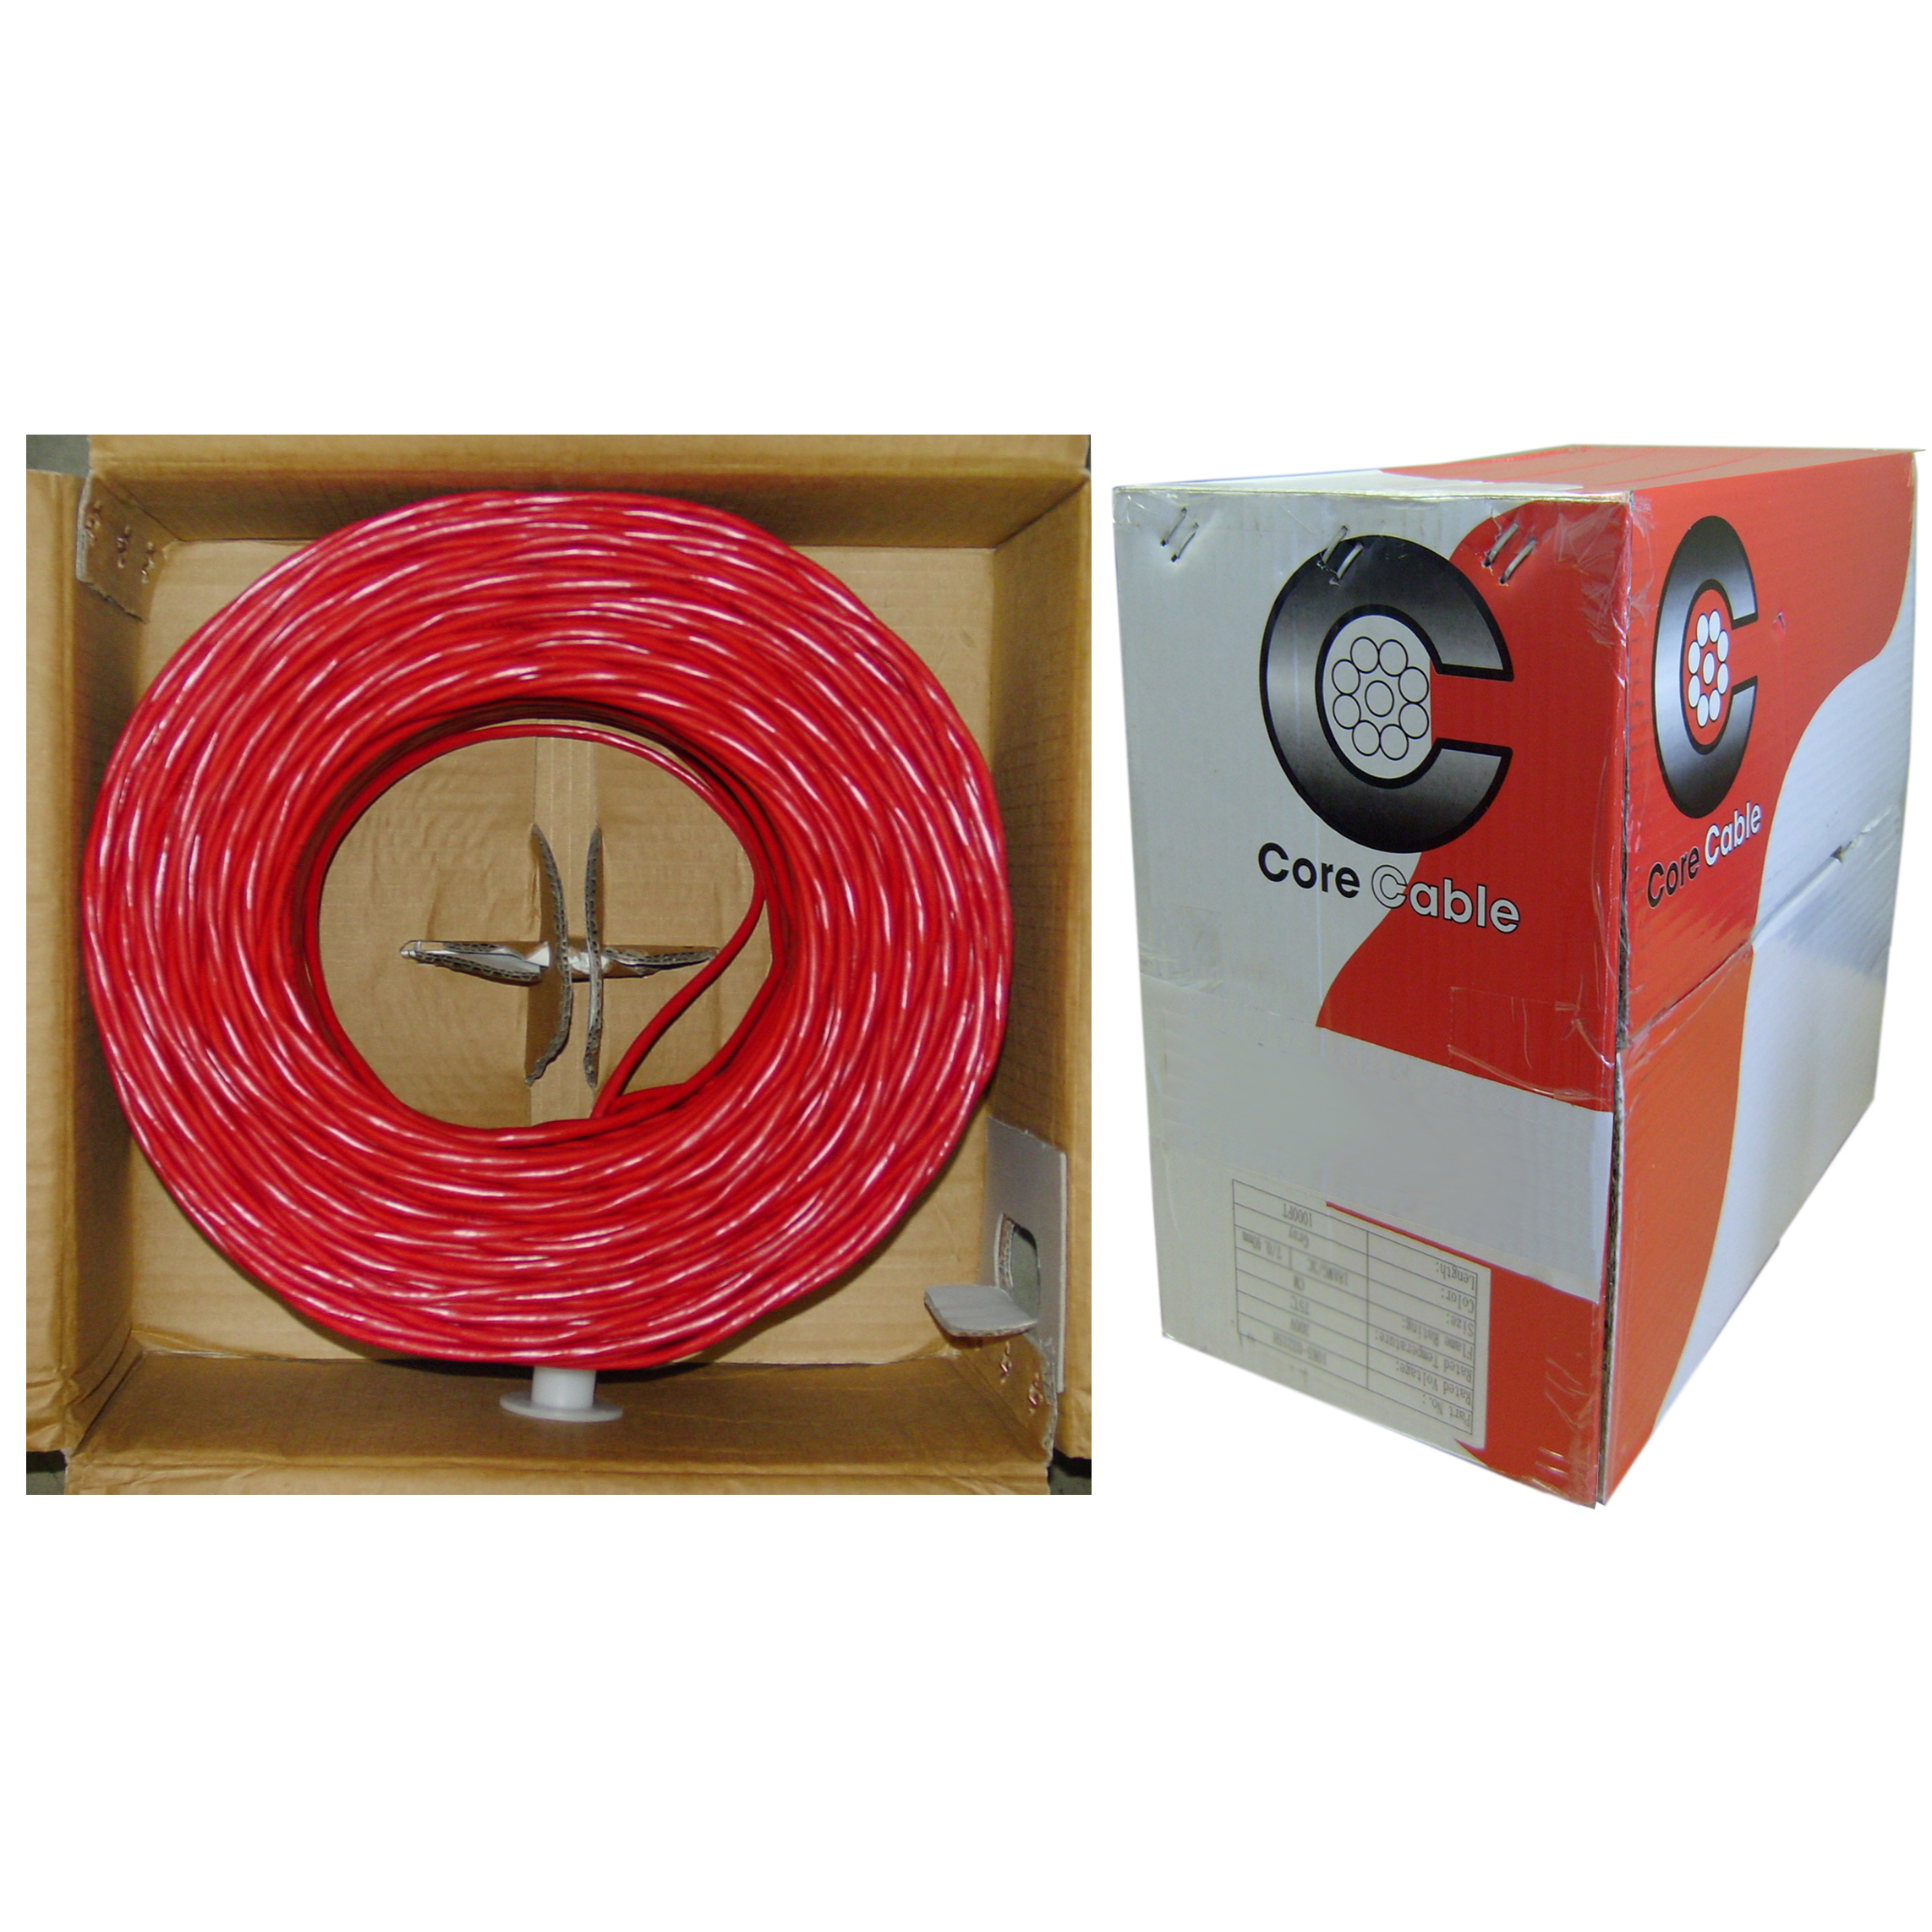 1000FT Unshielded Solid Fire Alarm Cable 18/2 Copper Wire 18AWG FPLR CL3R FT4 